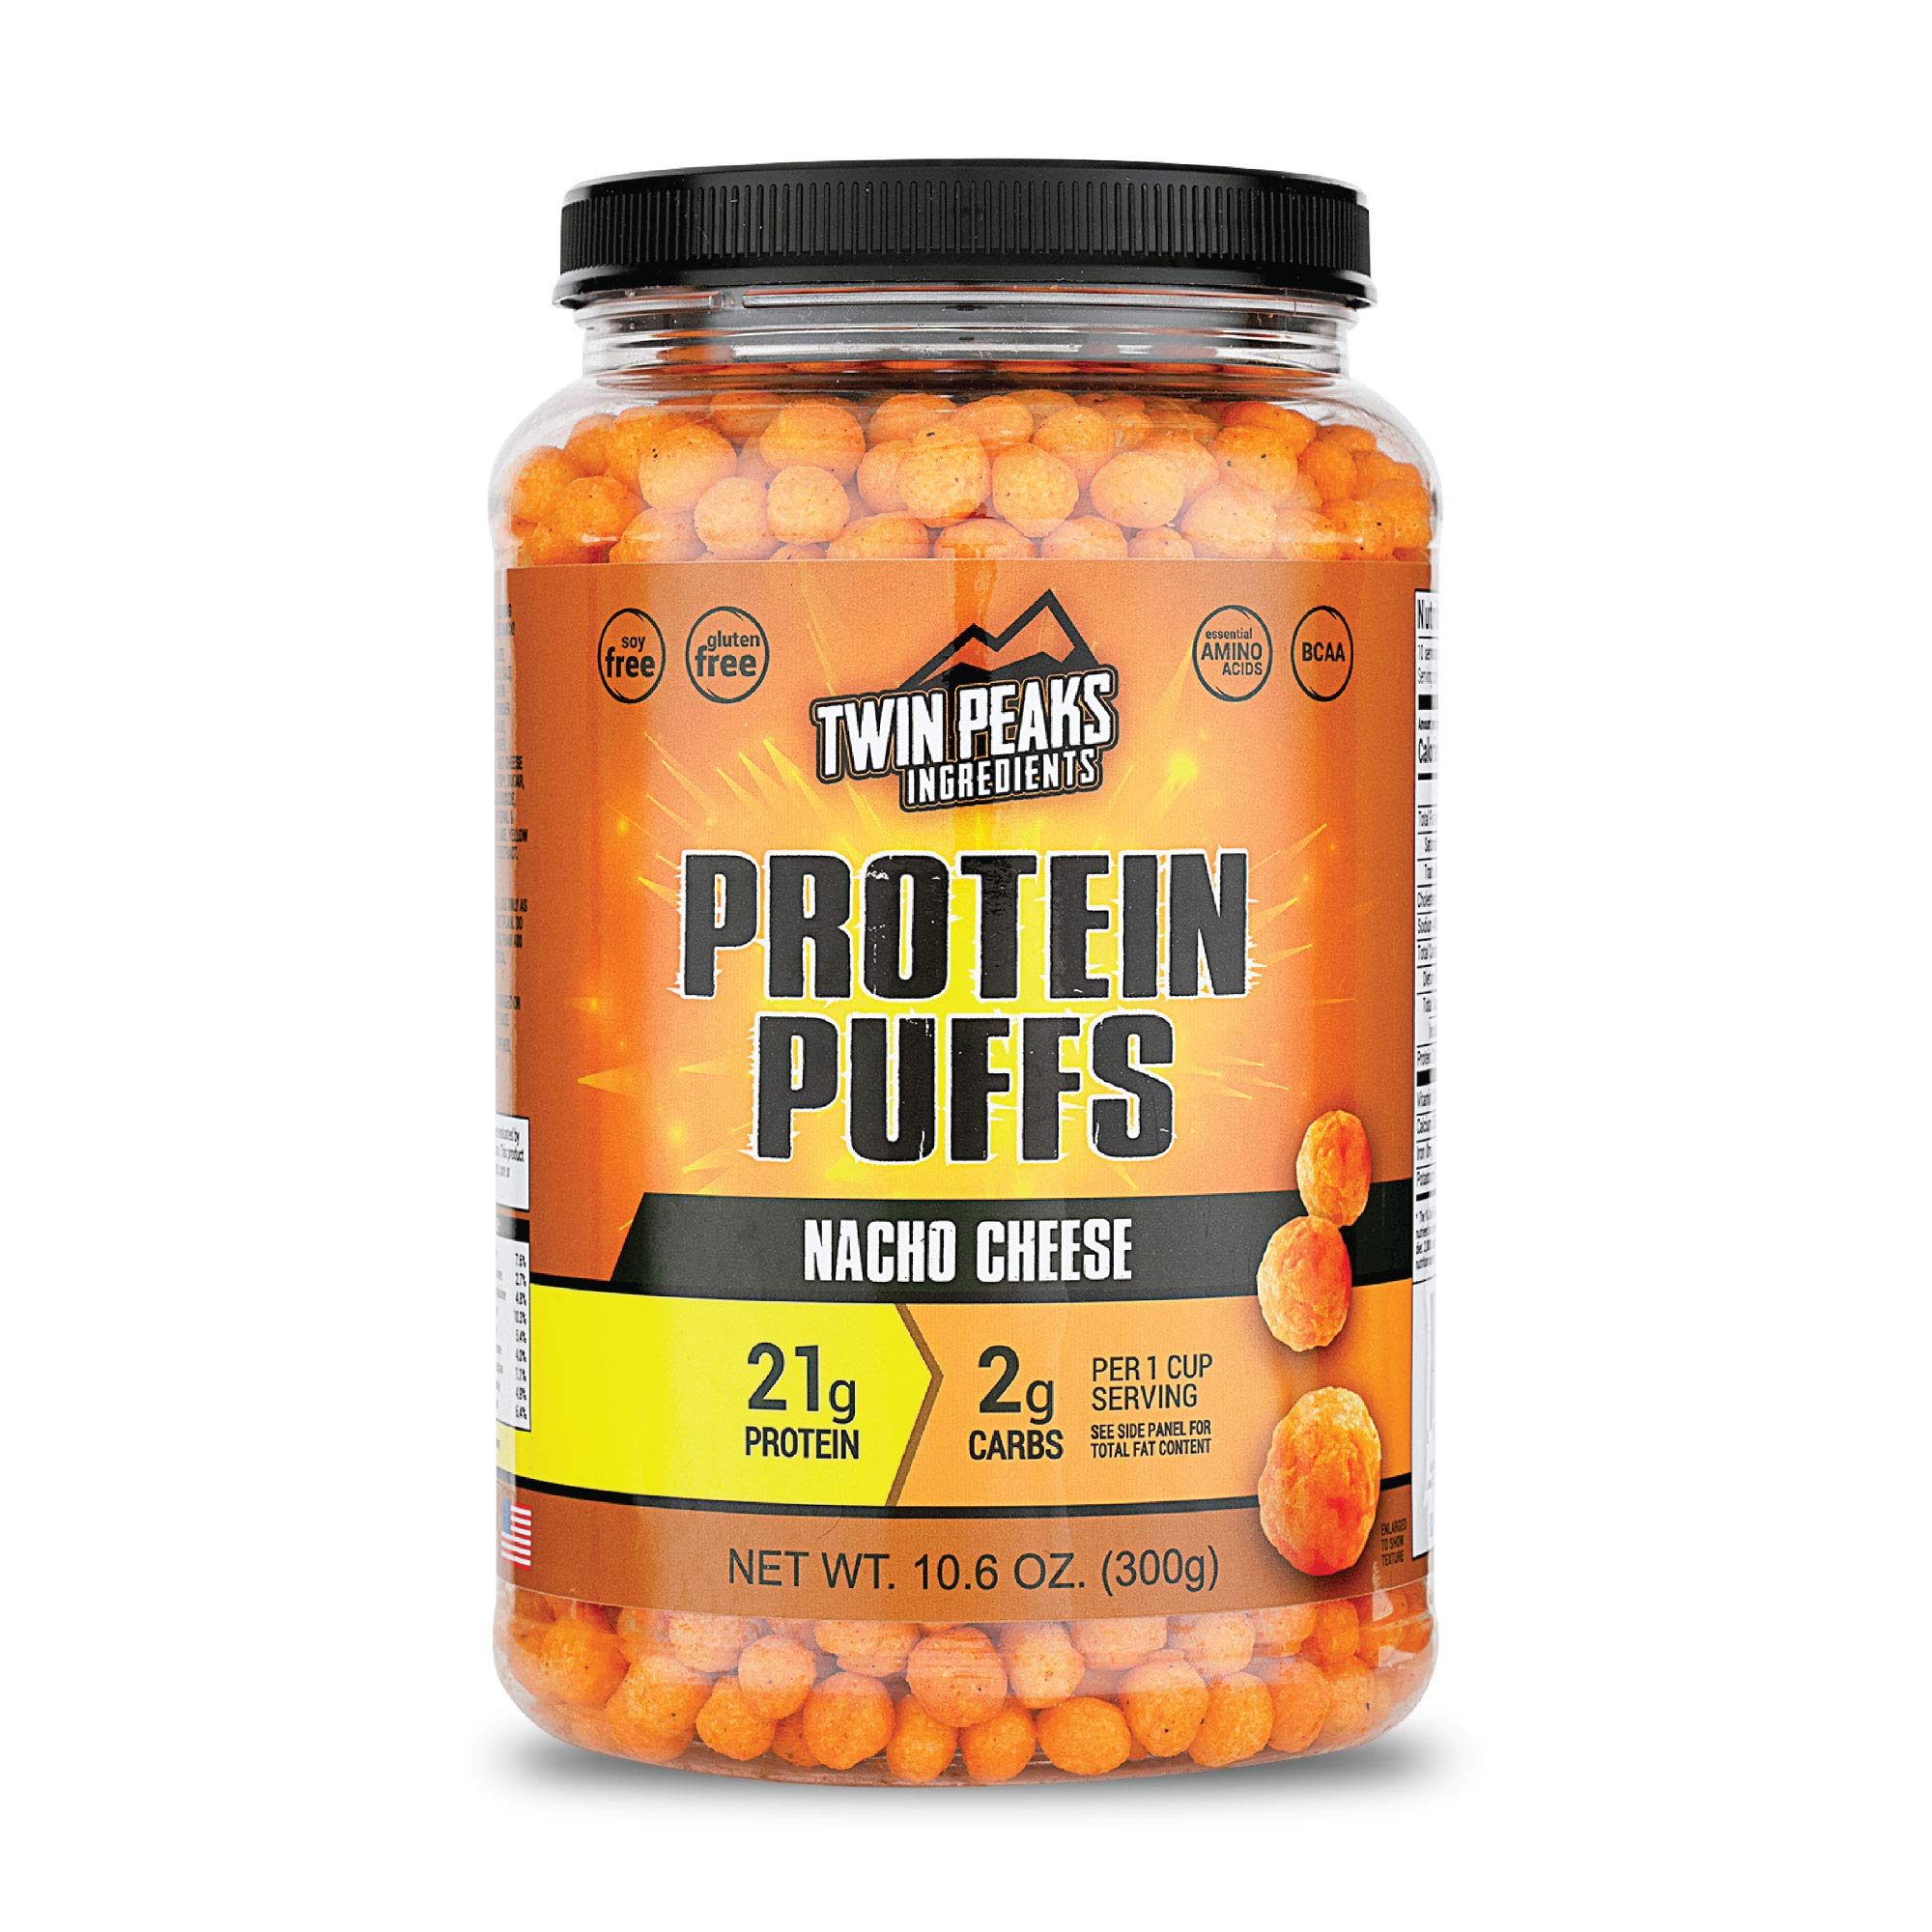 Twin Peaks Low Carb, Keto Friendly Protein Puffs, 3 Bags of Assorted Flavor Puffs + 1 Jug Nacho Cheese Flavor Puffs